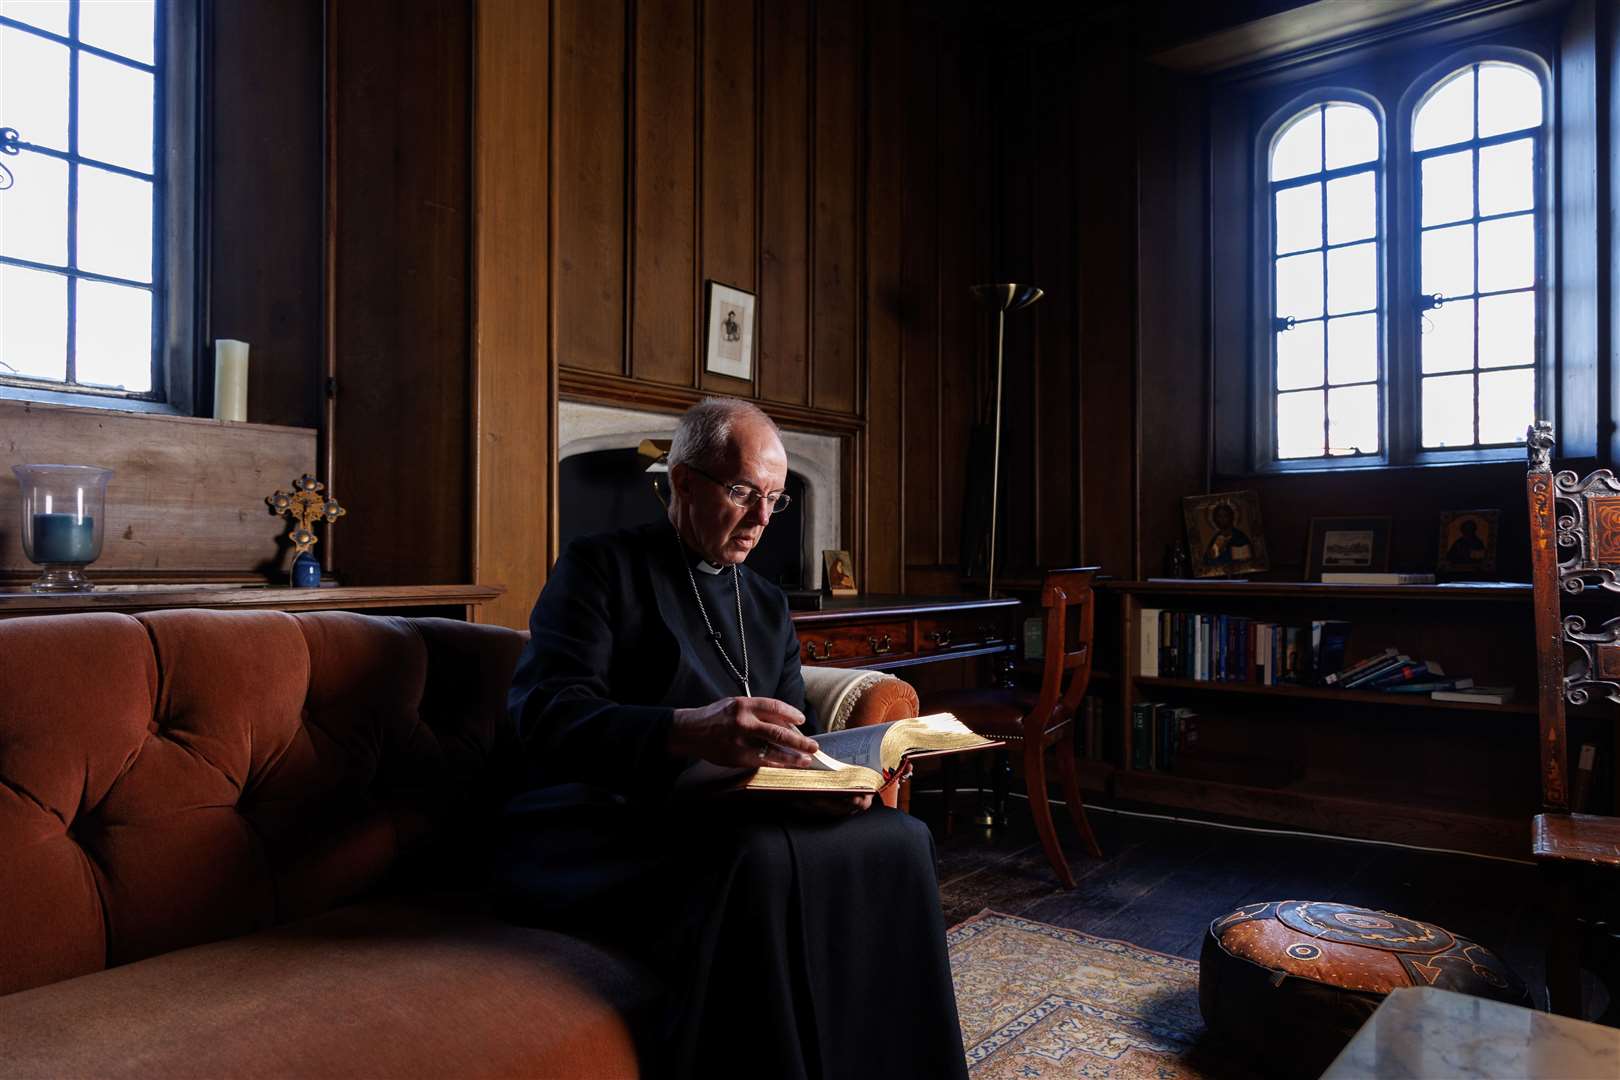 The Archbishop of Canterbury, the Most Revd Justin Welby, reading the King’s Coronation Bible in the Cranmer Study at Lambeth Palace (Neil Turner for Lambeth Palace/PA)